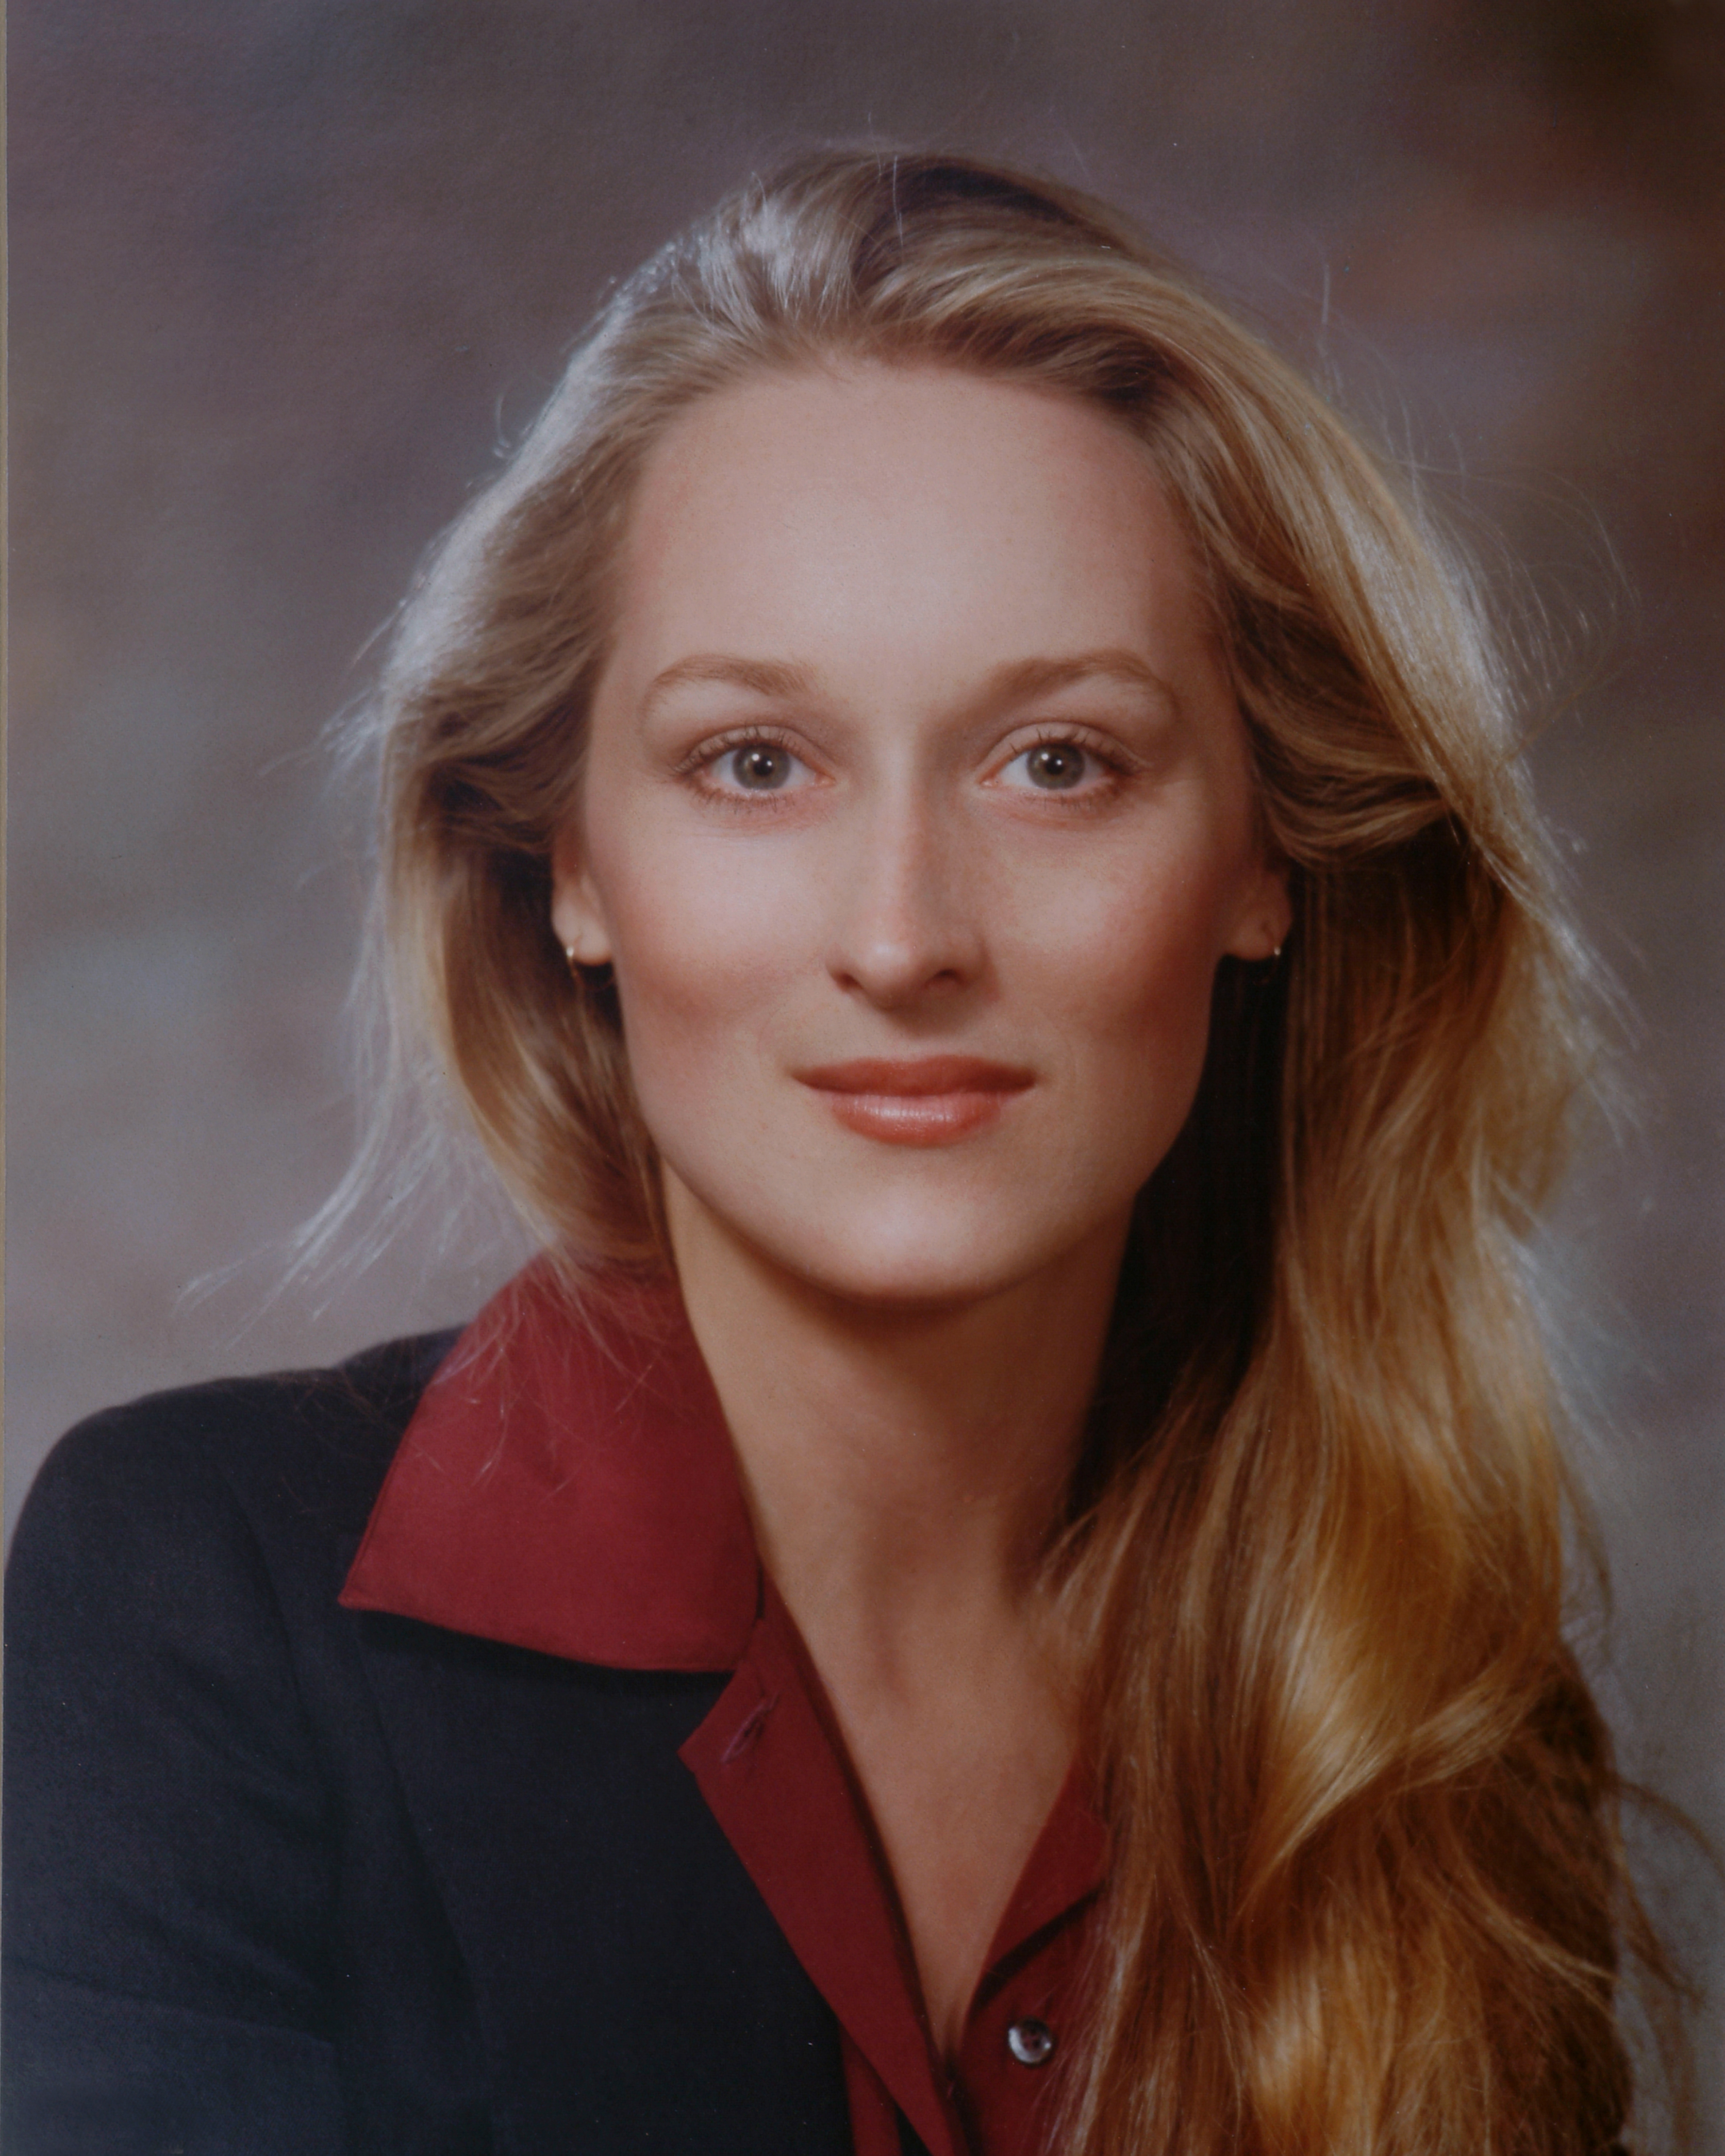 Meryl Streep portrait from 1979 | Source: Getty Images